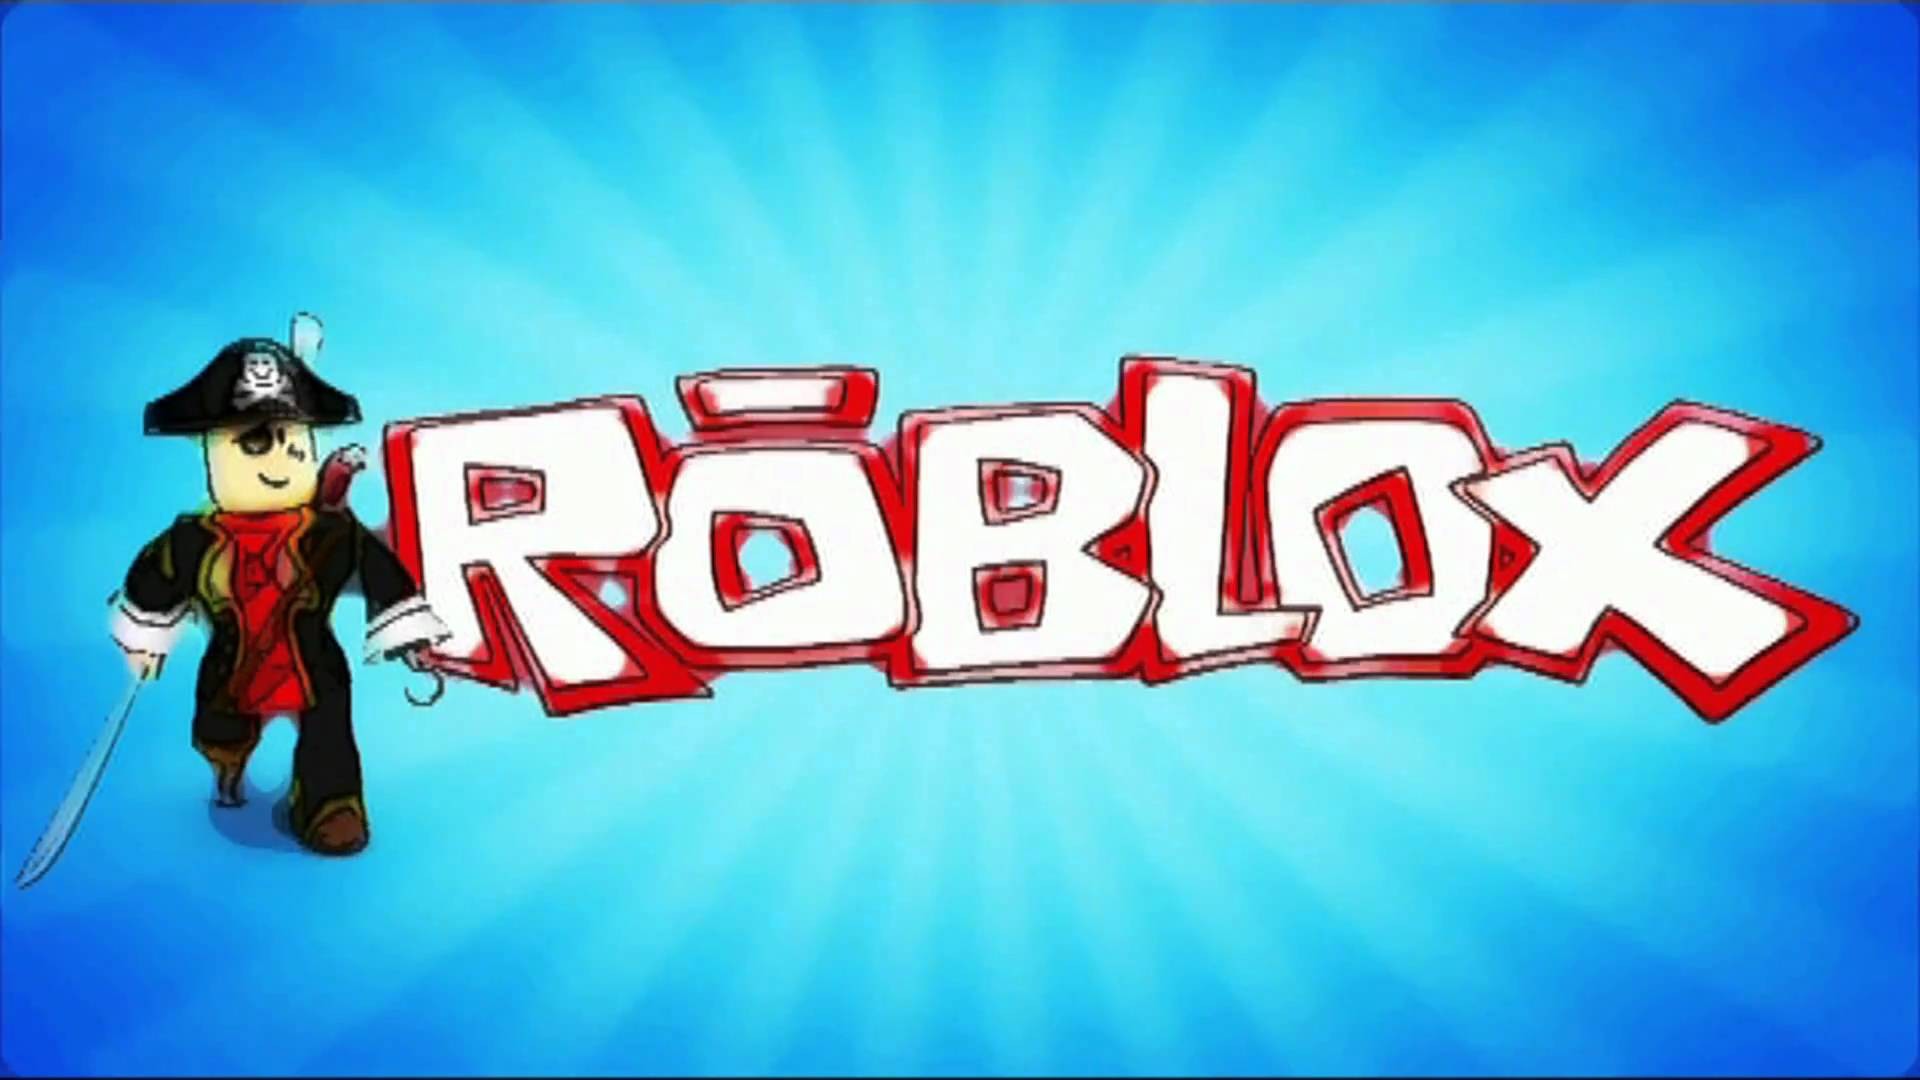 Roblox Background Download Free Beautiful Hd Backgrounds For Desktop Mobile Laptop In Any Resolution Desktop Android Iphone Ipad 1920x1080 480x800 720x1280 1920x1200 Etc Wallpapertag - asthetic roblox iphone background